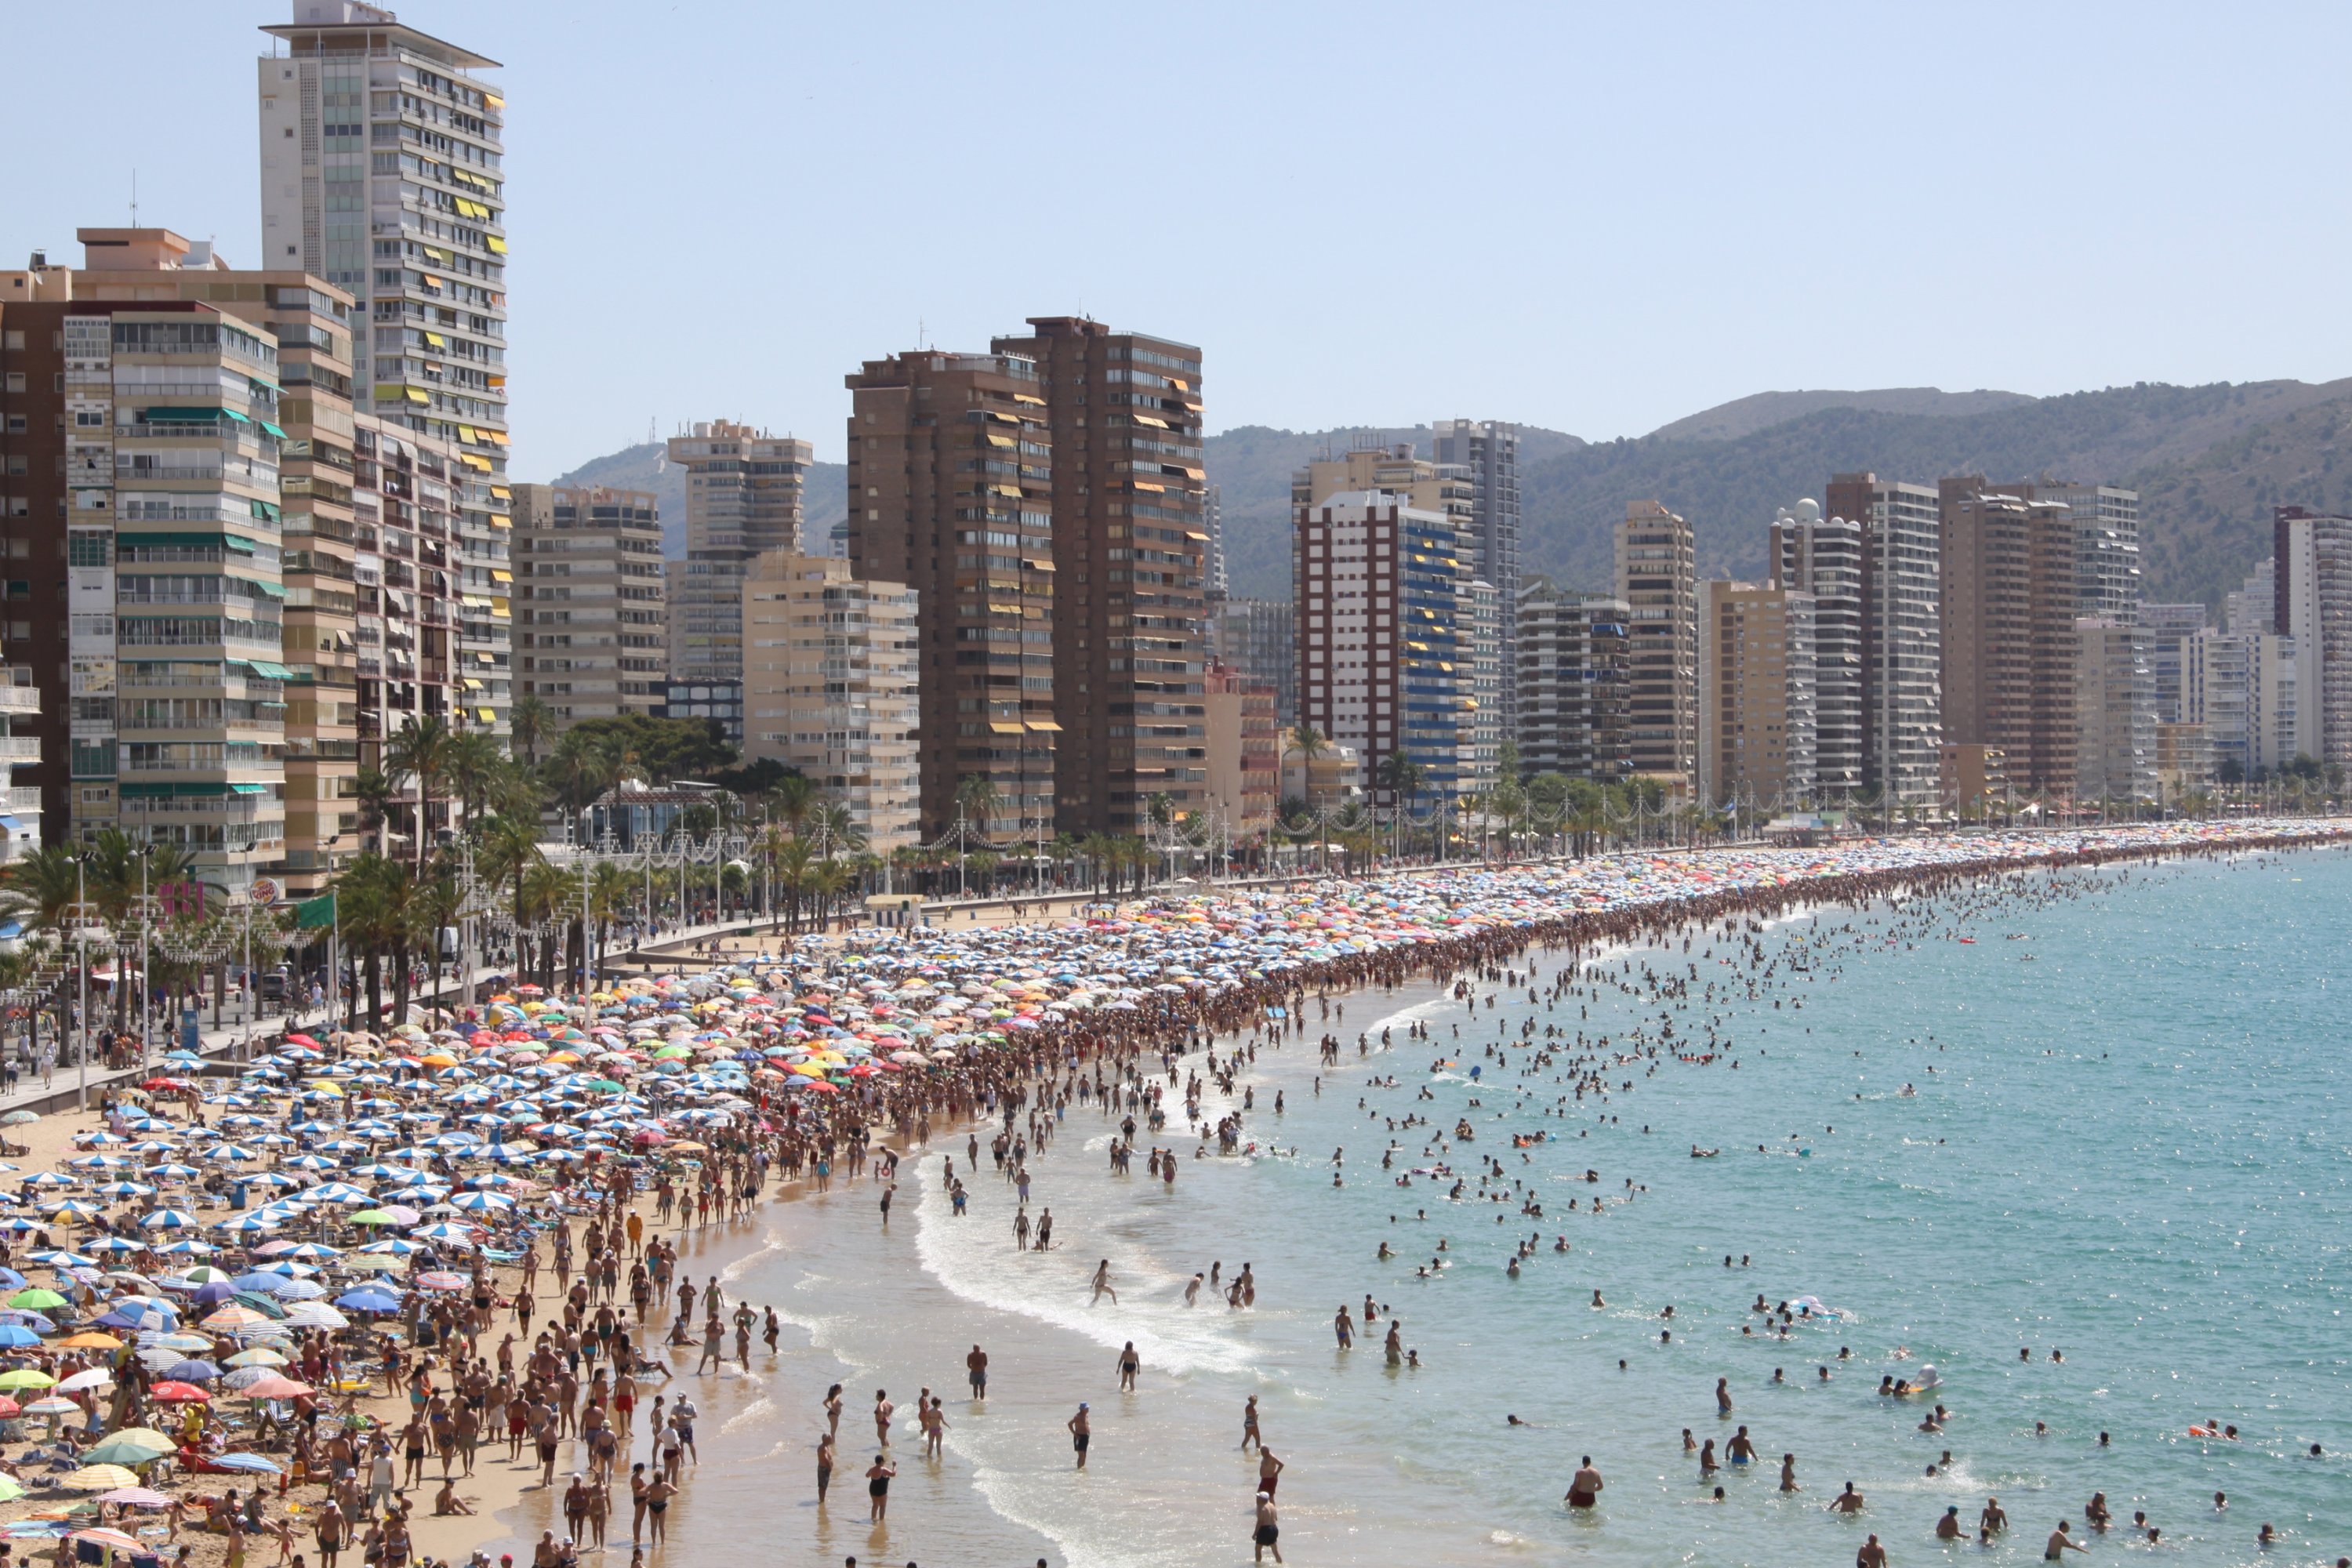  The Costa Blanca is known for the masses of tourists who gather there for its beaches. (dpa Photo) 